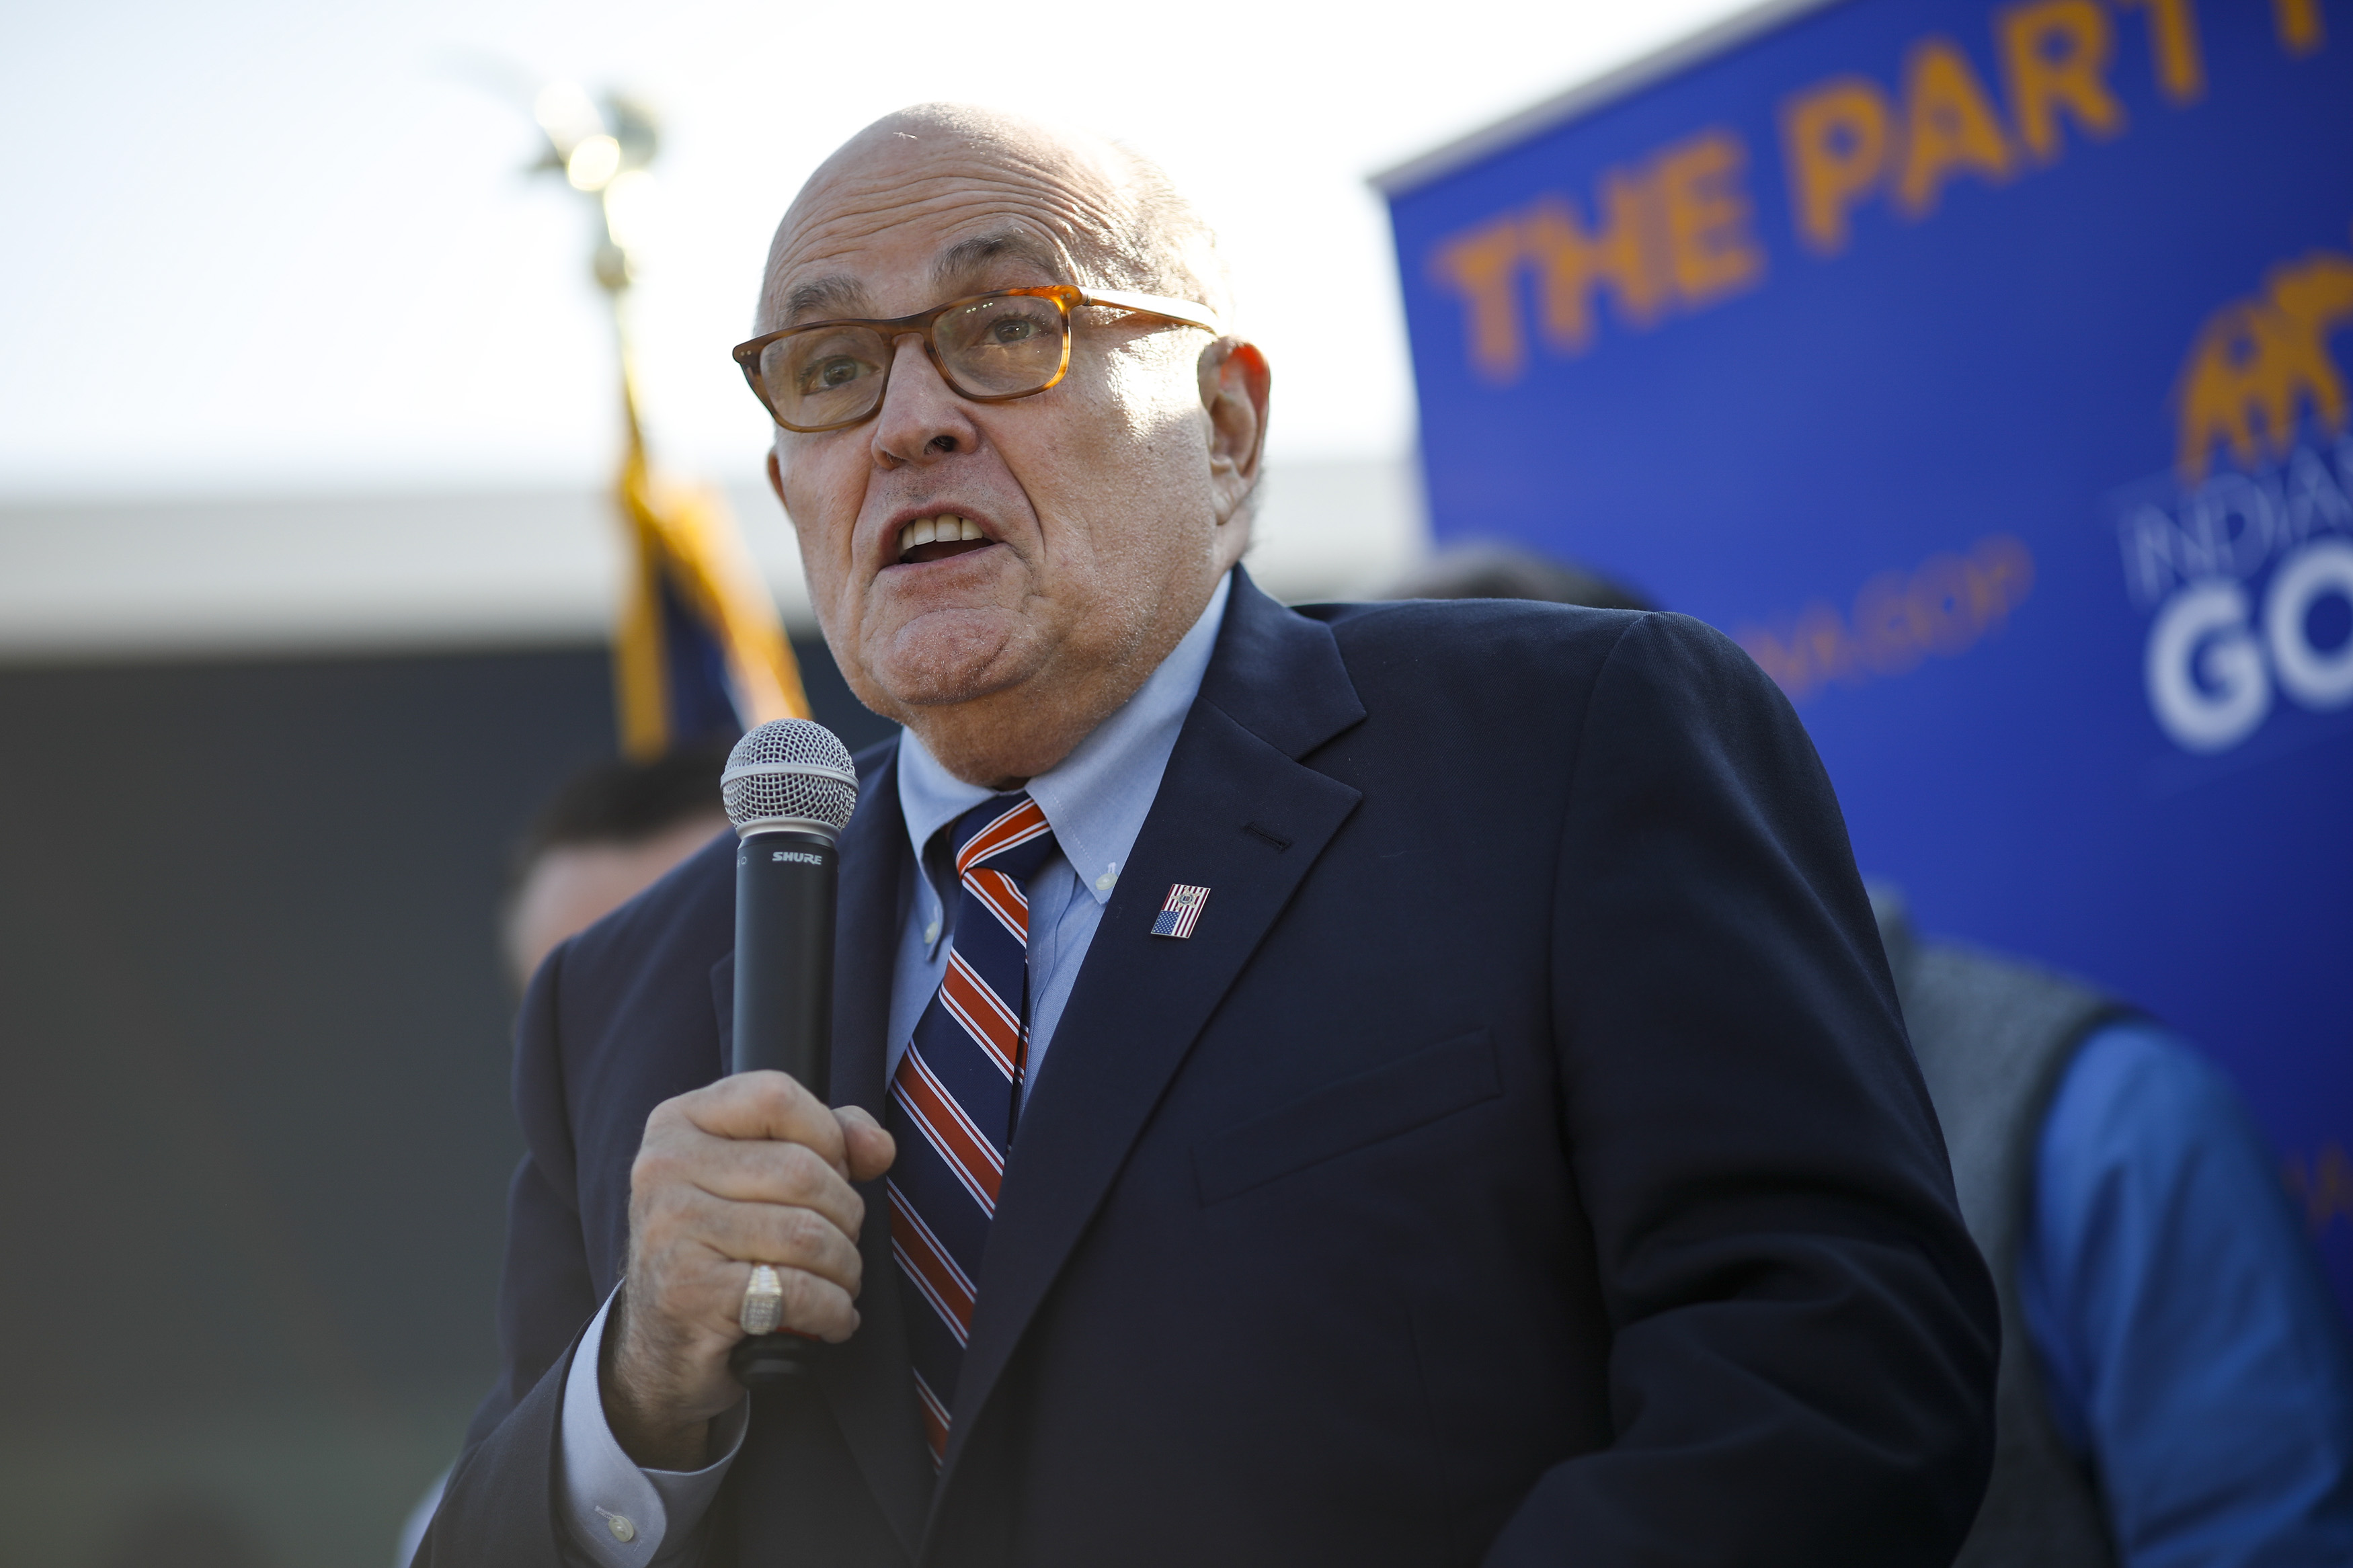 RANKLIN TOWNSHIP, IN - NOVEMBER 03: Former New York City Mayor Rudy Giuliani arrives to campaign for Republican Senate hopeful Mike Braun on November 3, 2018 in Franklin Township, Indiana. Braun is locked in a tight race with incumbent Democrat Sen. Joe Donnelly. (Photo by Aaron P. Bernstein/Getty Images)